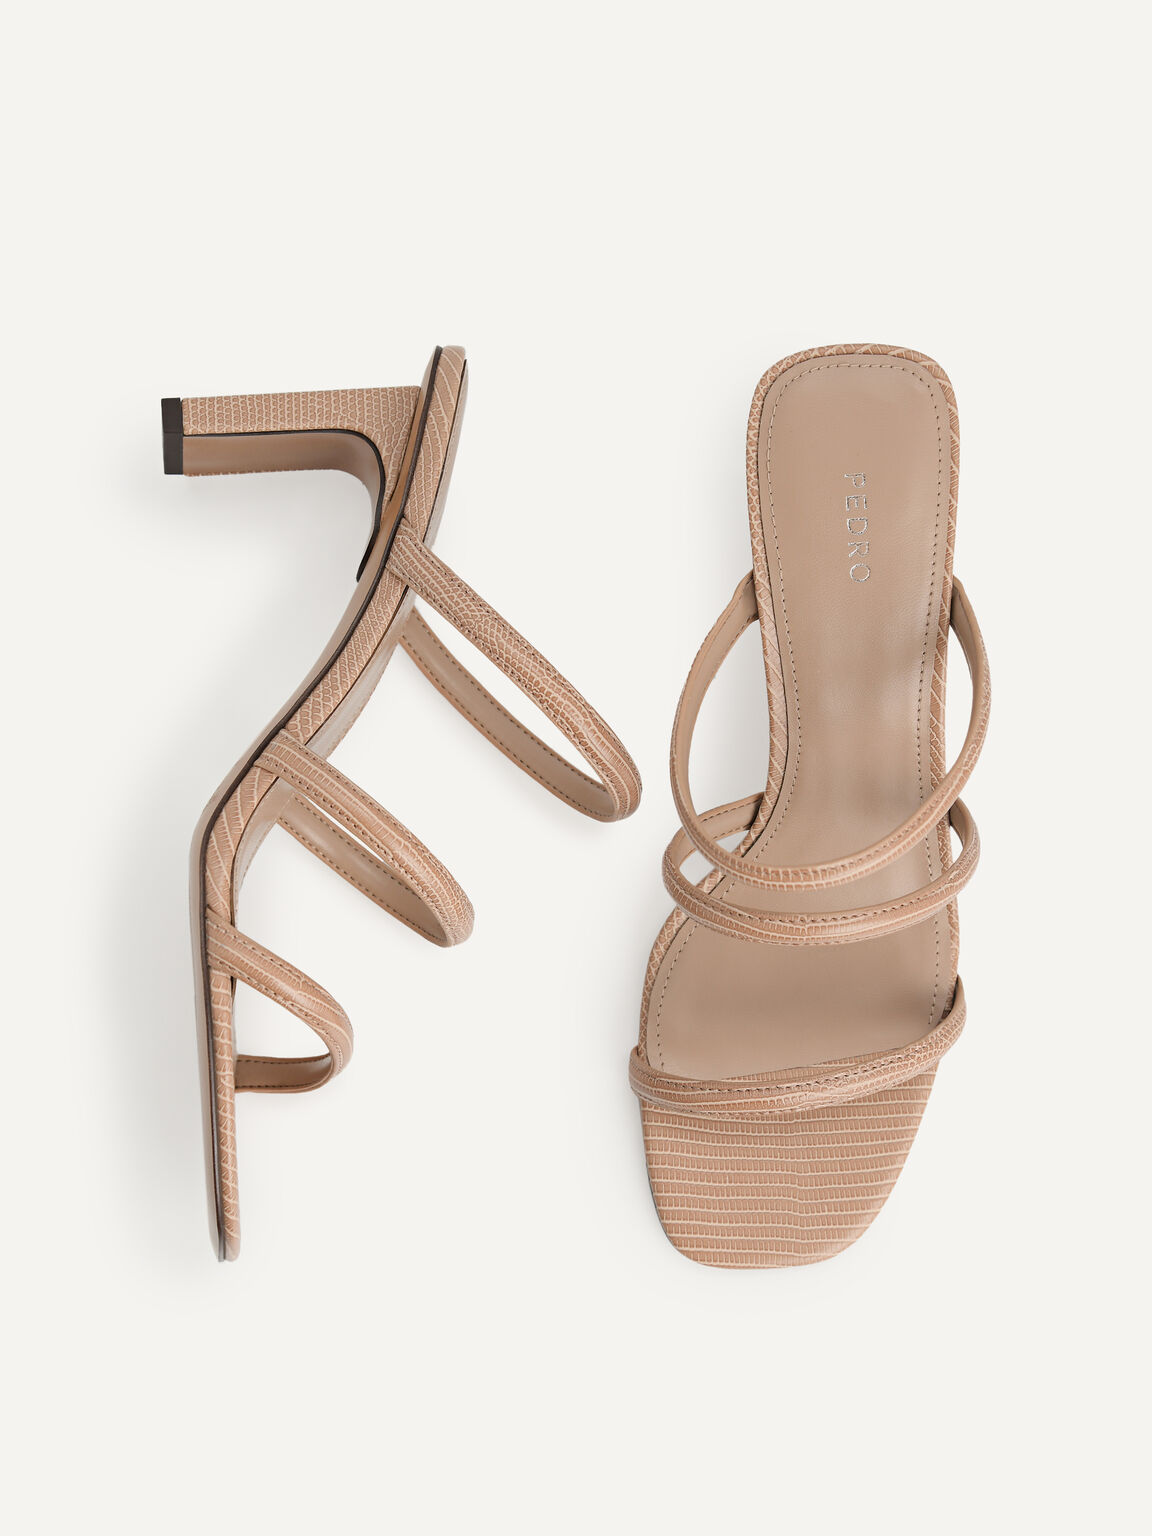 Strappy Heeled Lizard-Effect Sandals, Taupe, hi-res